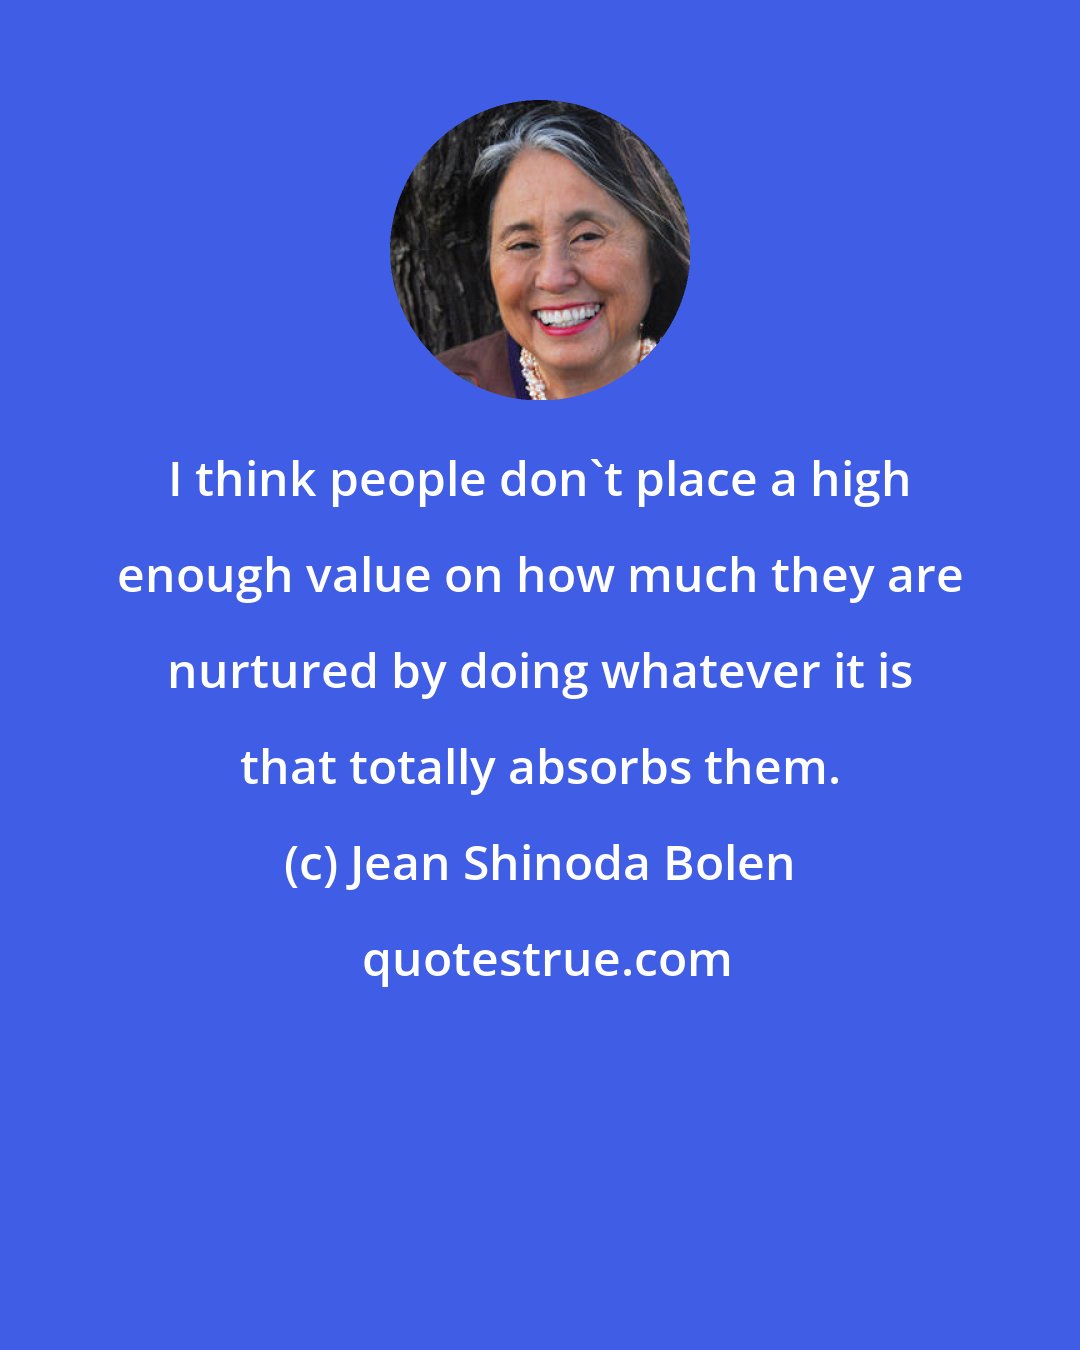 Jean Shinoda Bolen: I think people don't place a high enough value on how much they are nurtured by doing whatever it is that totally absorbs them.